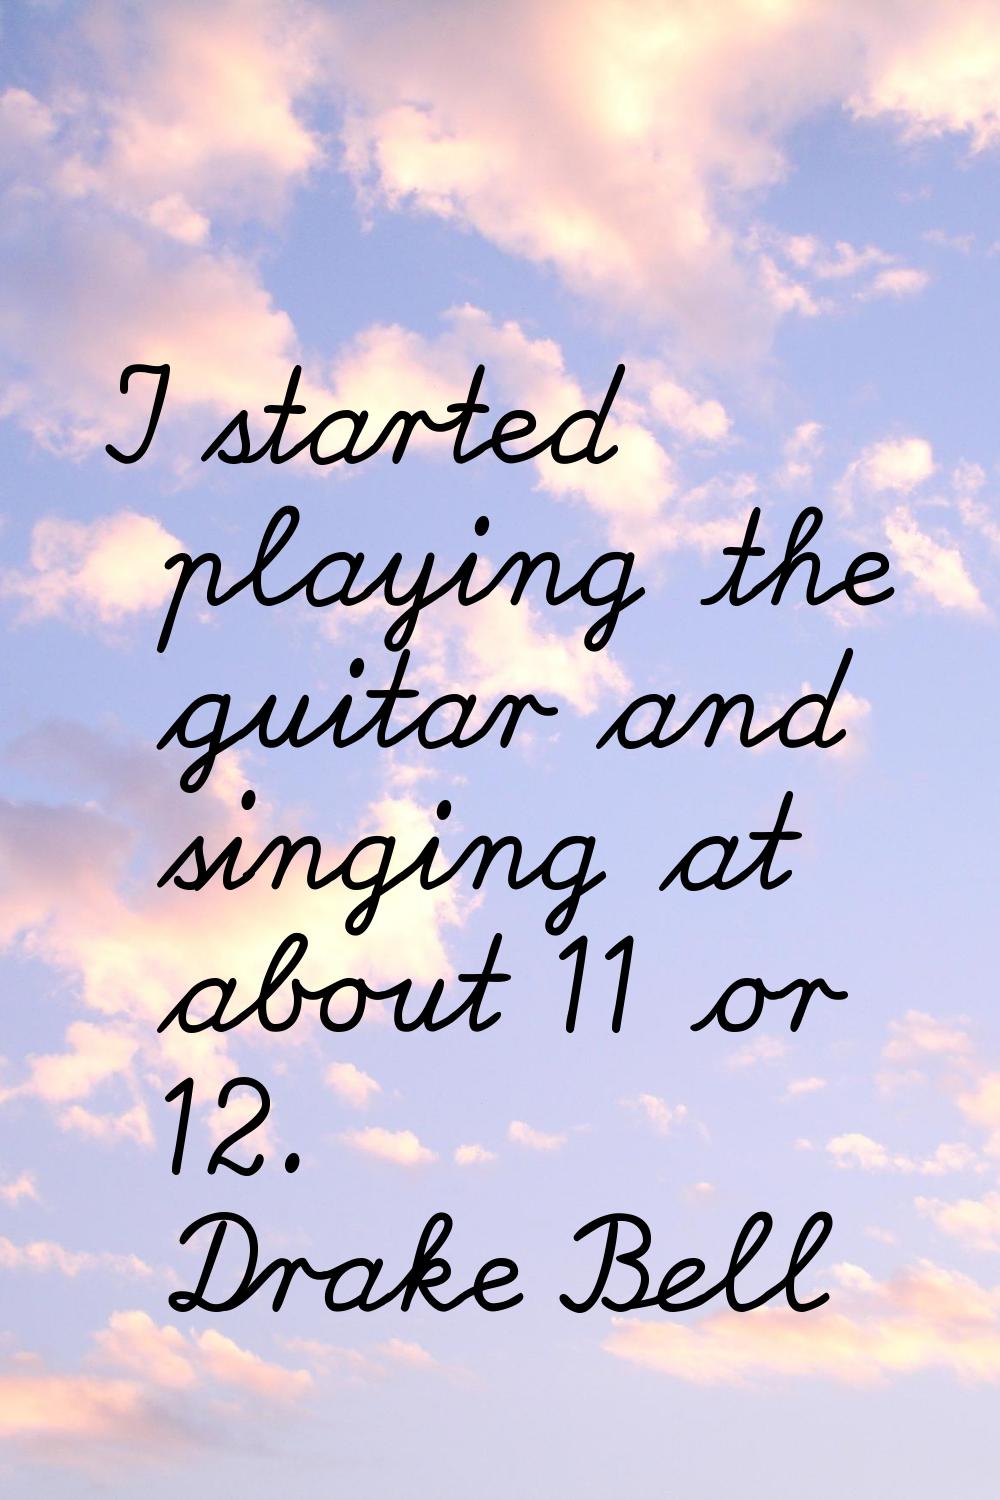 I started playing the guitar and singing at about 11 or 12.